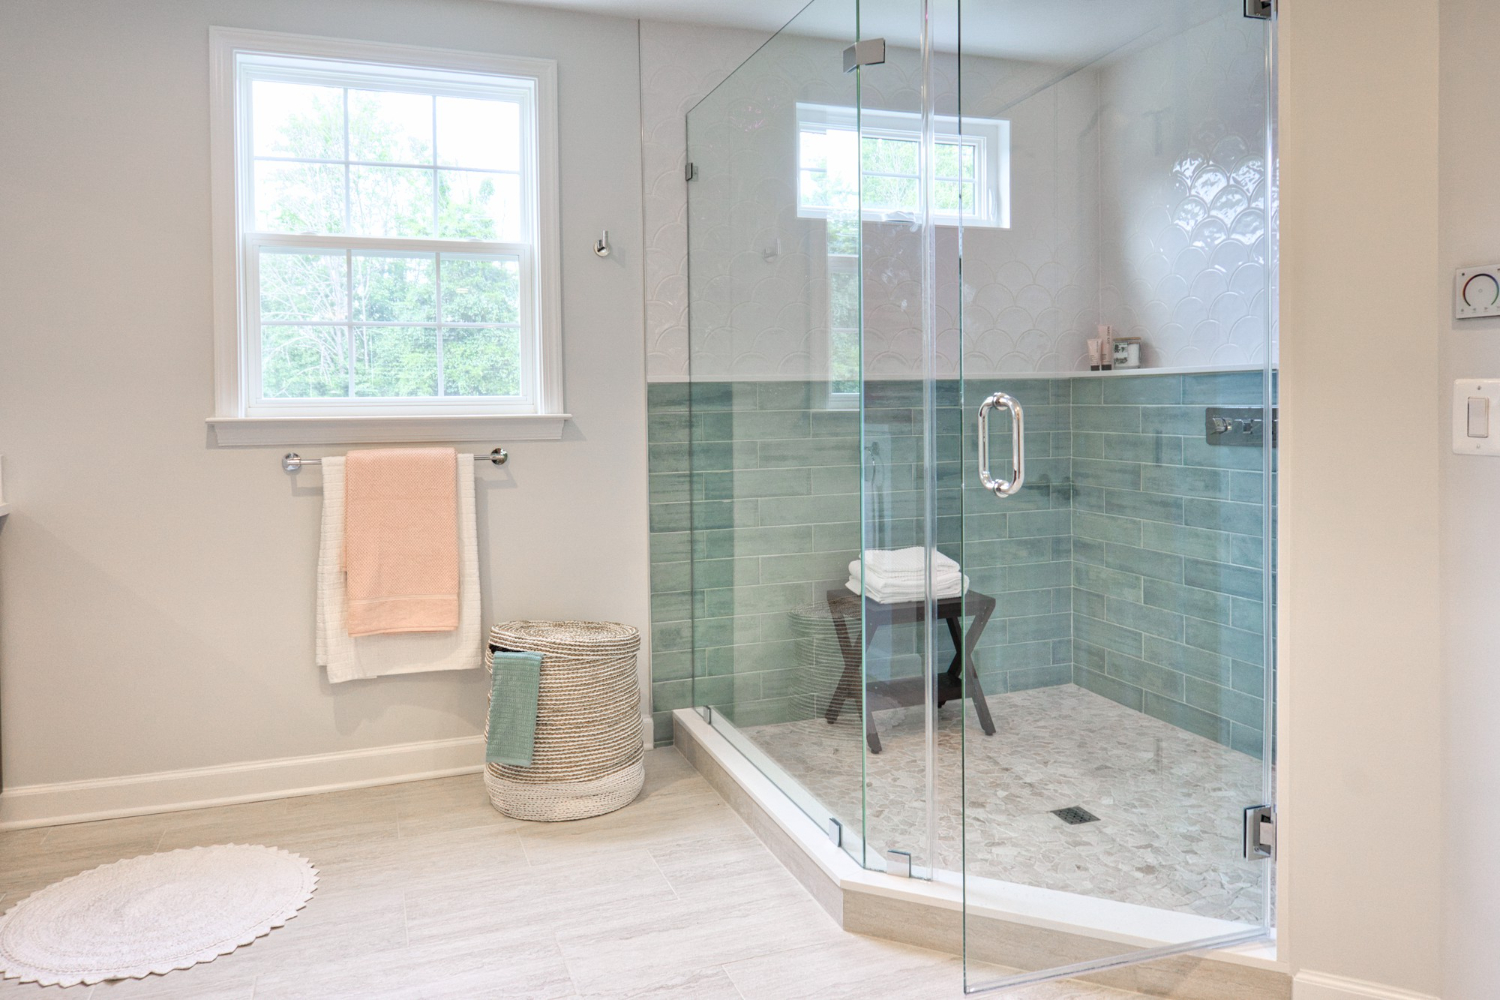 The Advantages of Glass Replacement for Windows and Shower Screens